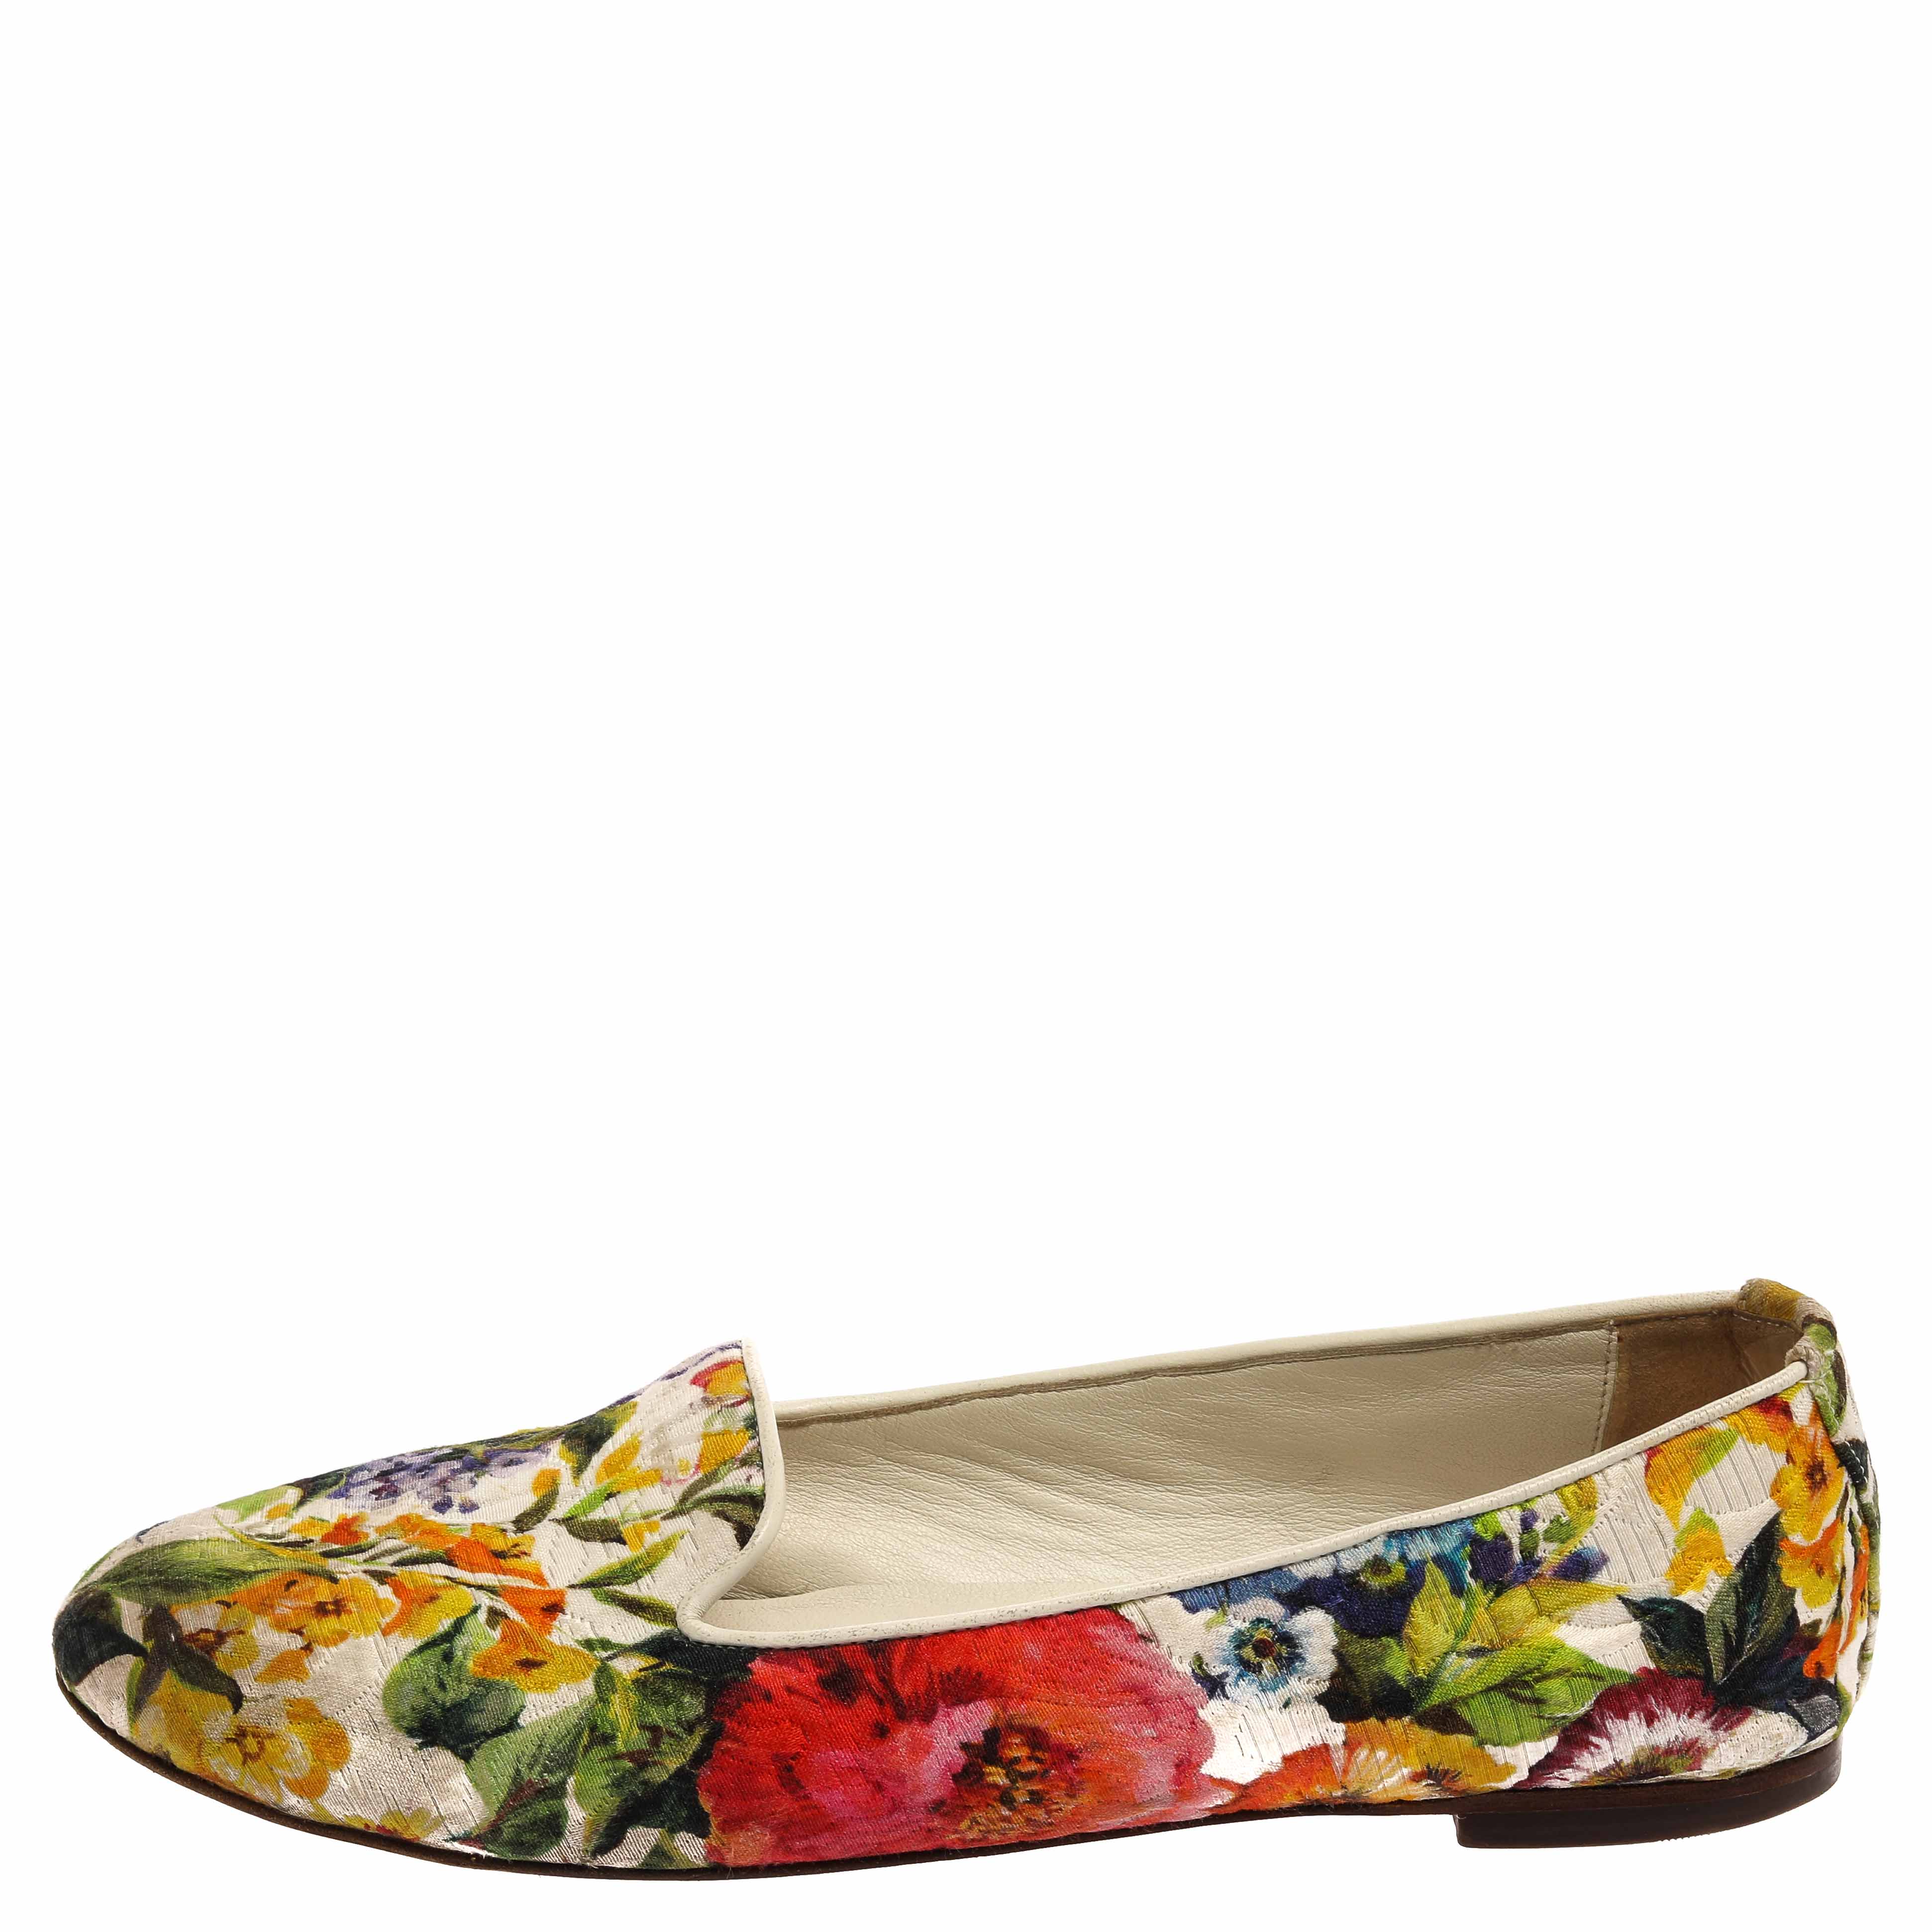 

Dolce & Gabbana Multicolor Floral Print Brocade Flat Smoking Slippers Size